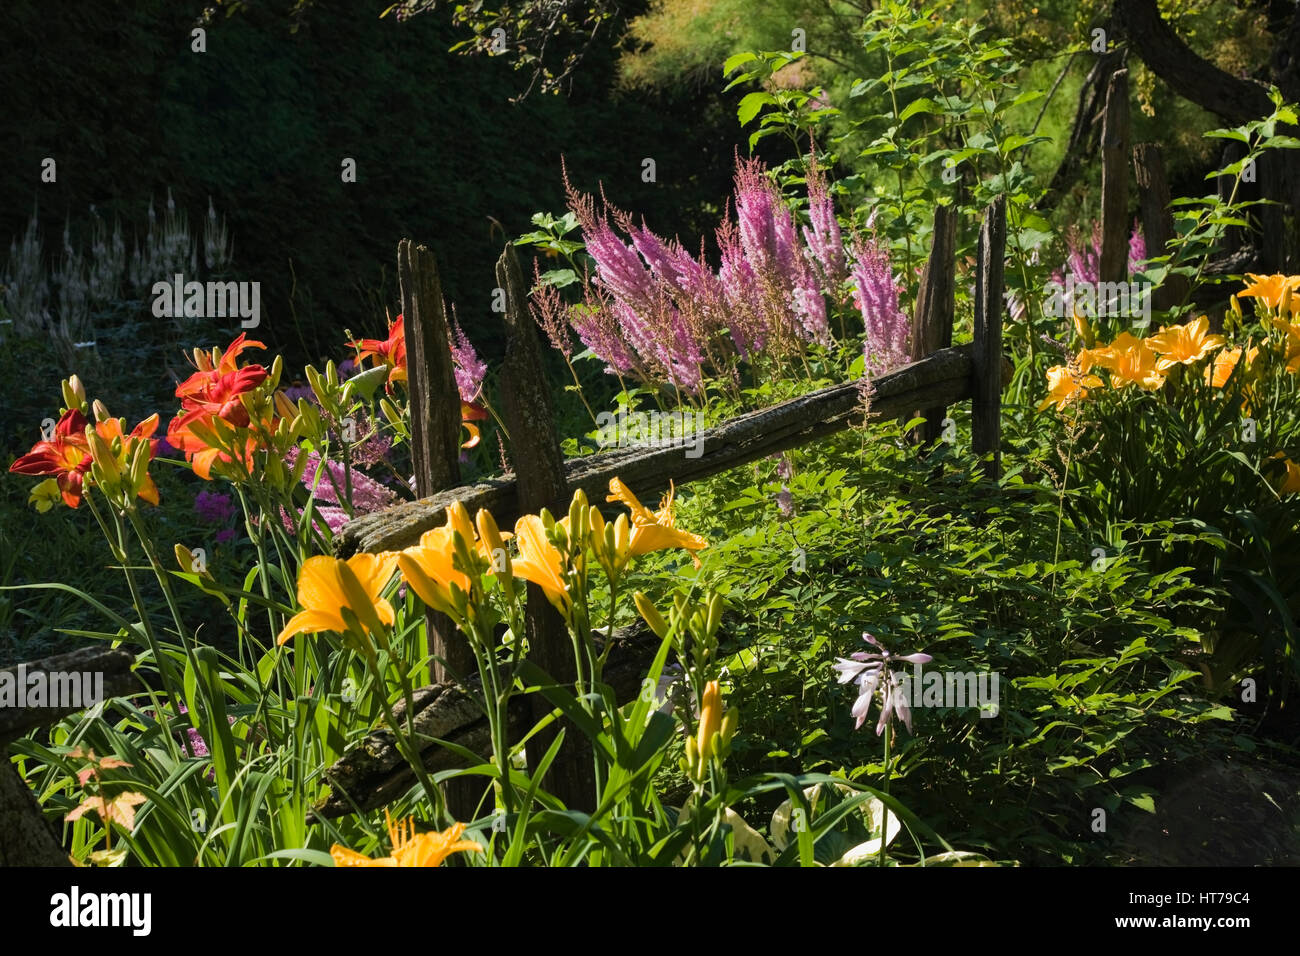 Rustic fence and flowerbed with Day lilies and Astilbe flowers in backyard garden. Stock Photo